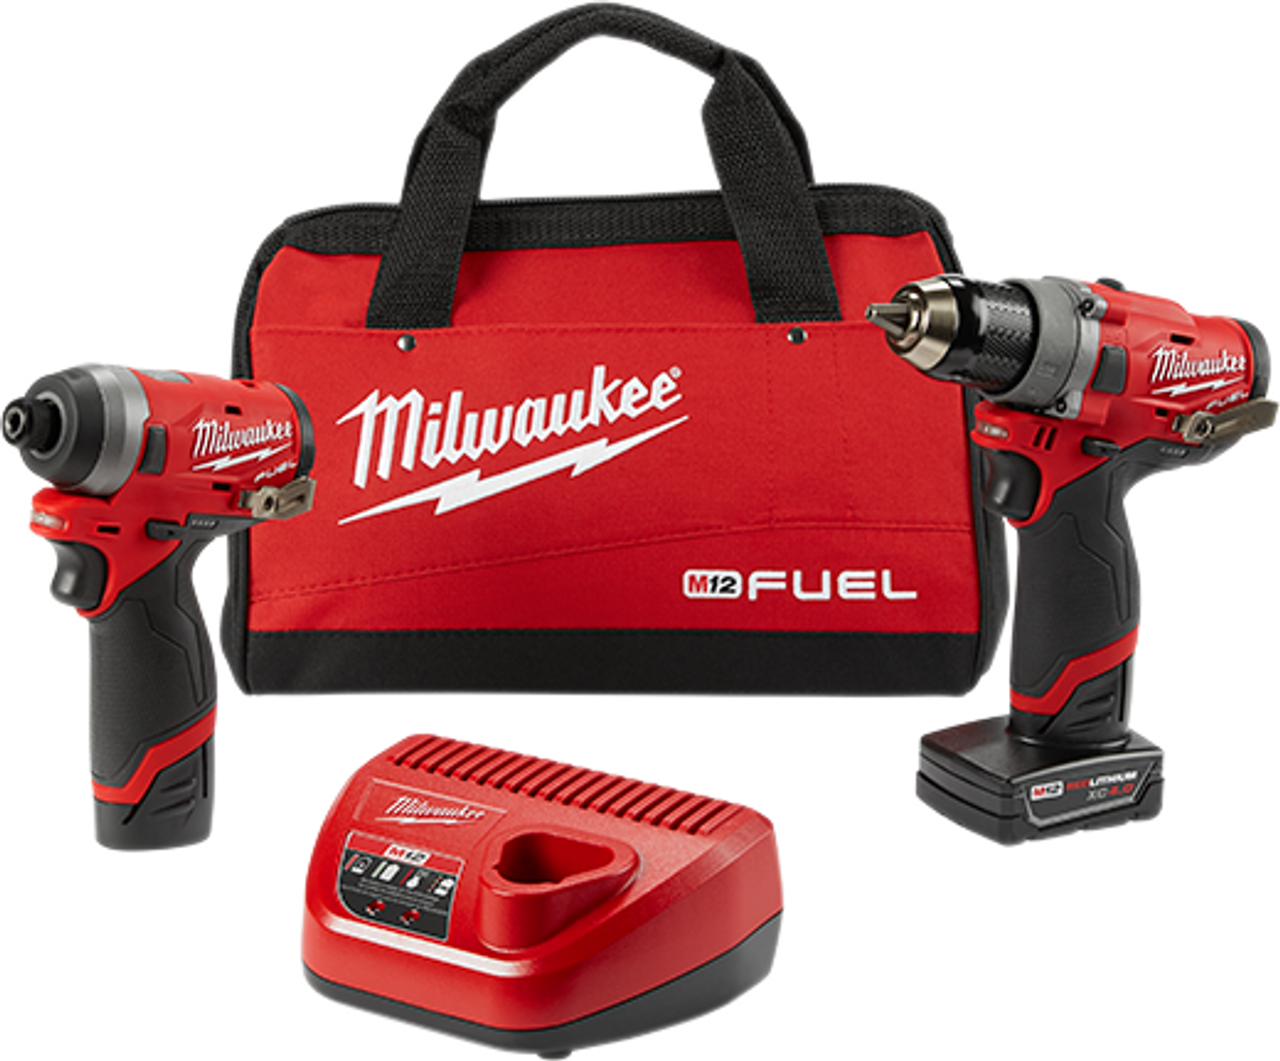 M12 FUEL? 2-Tool Combo Kit: 1/2" Drill Driver and 1/4" Hex Impact Driver